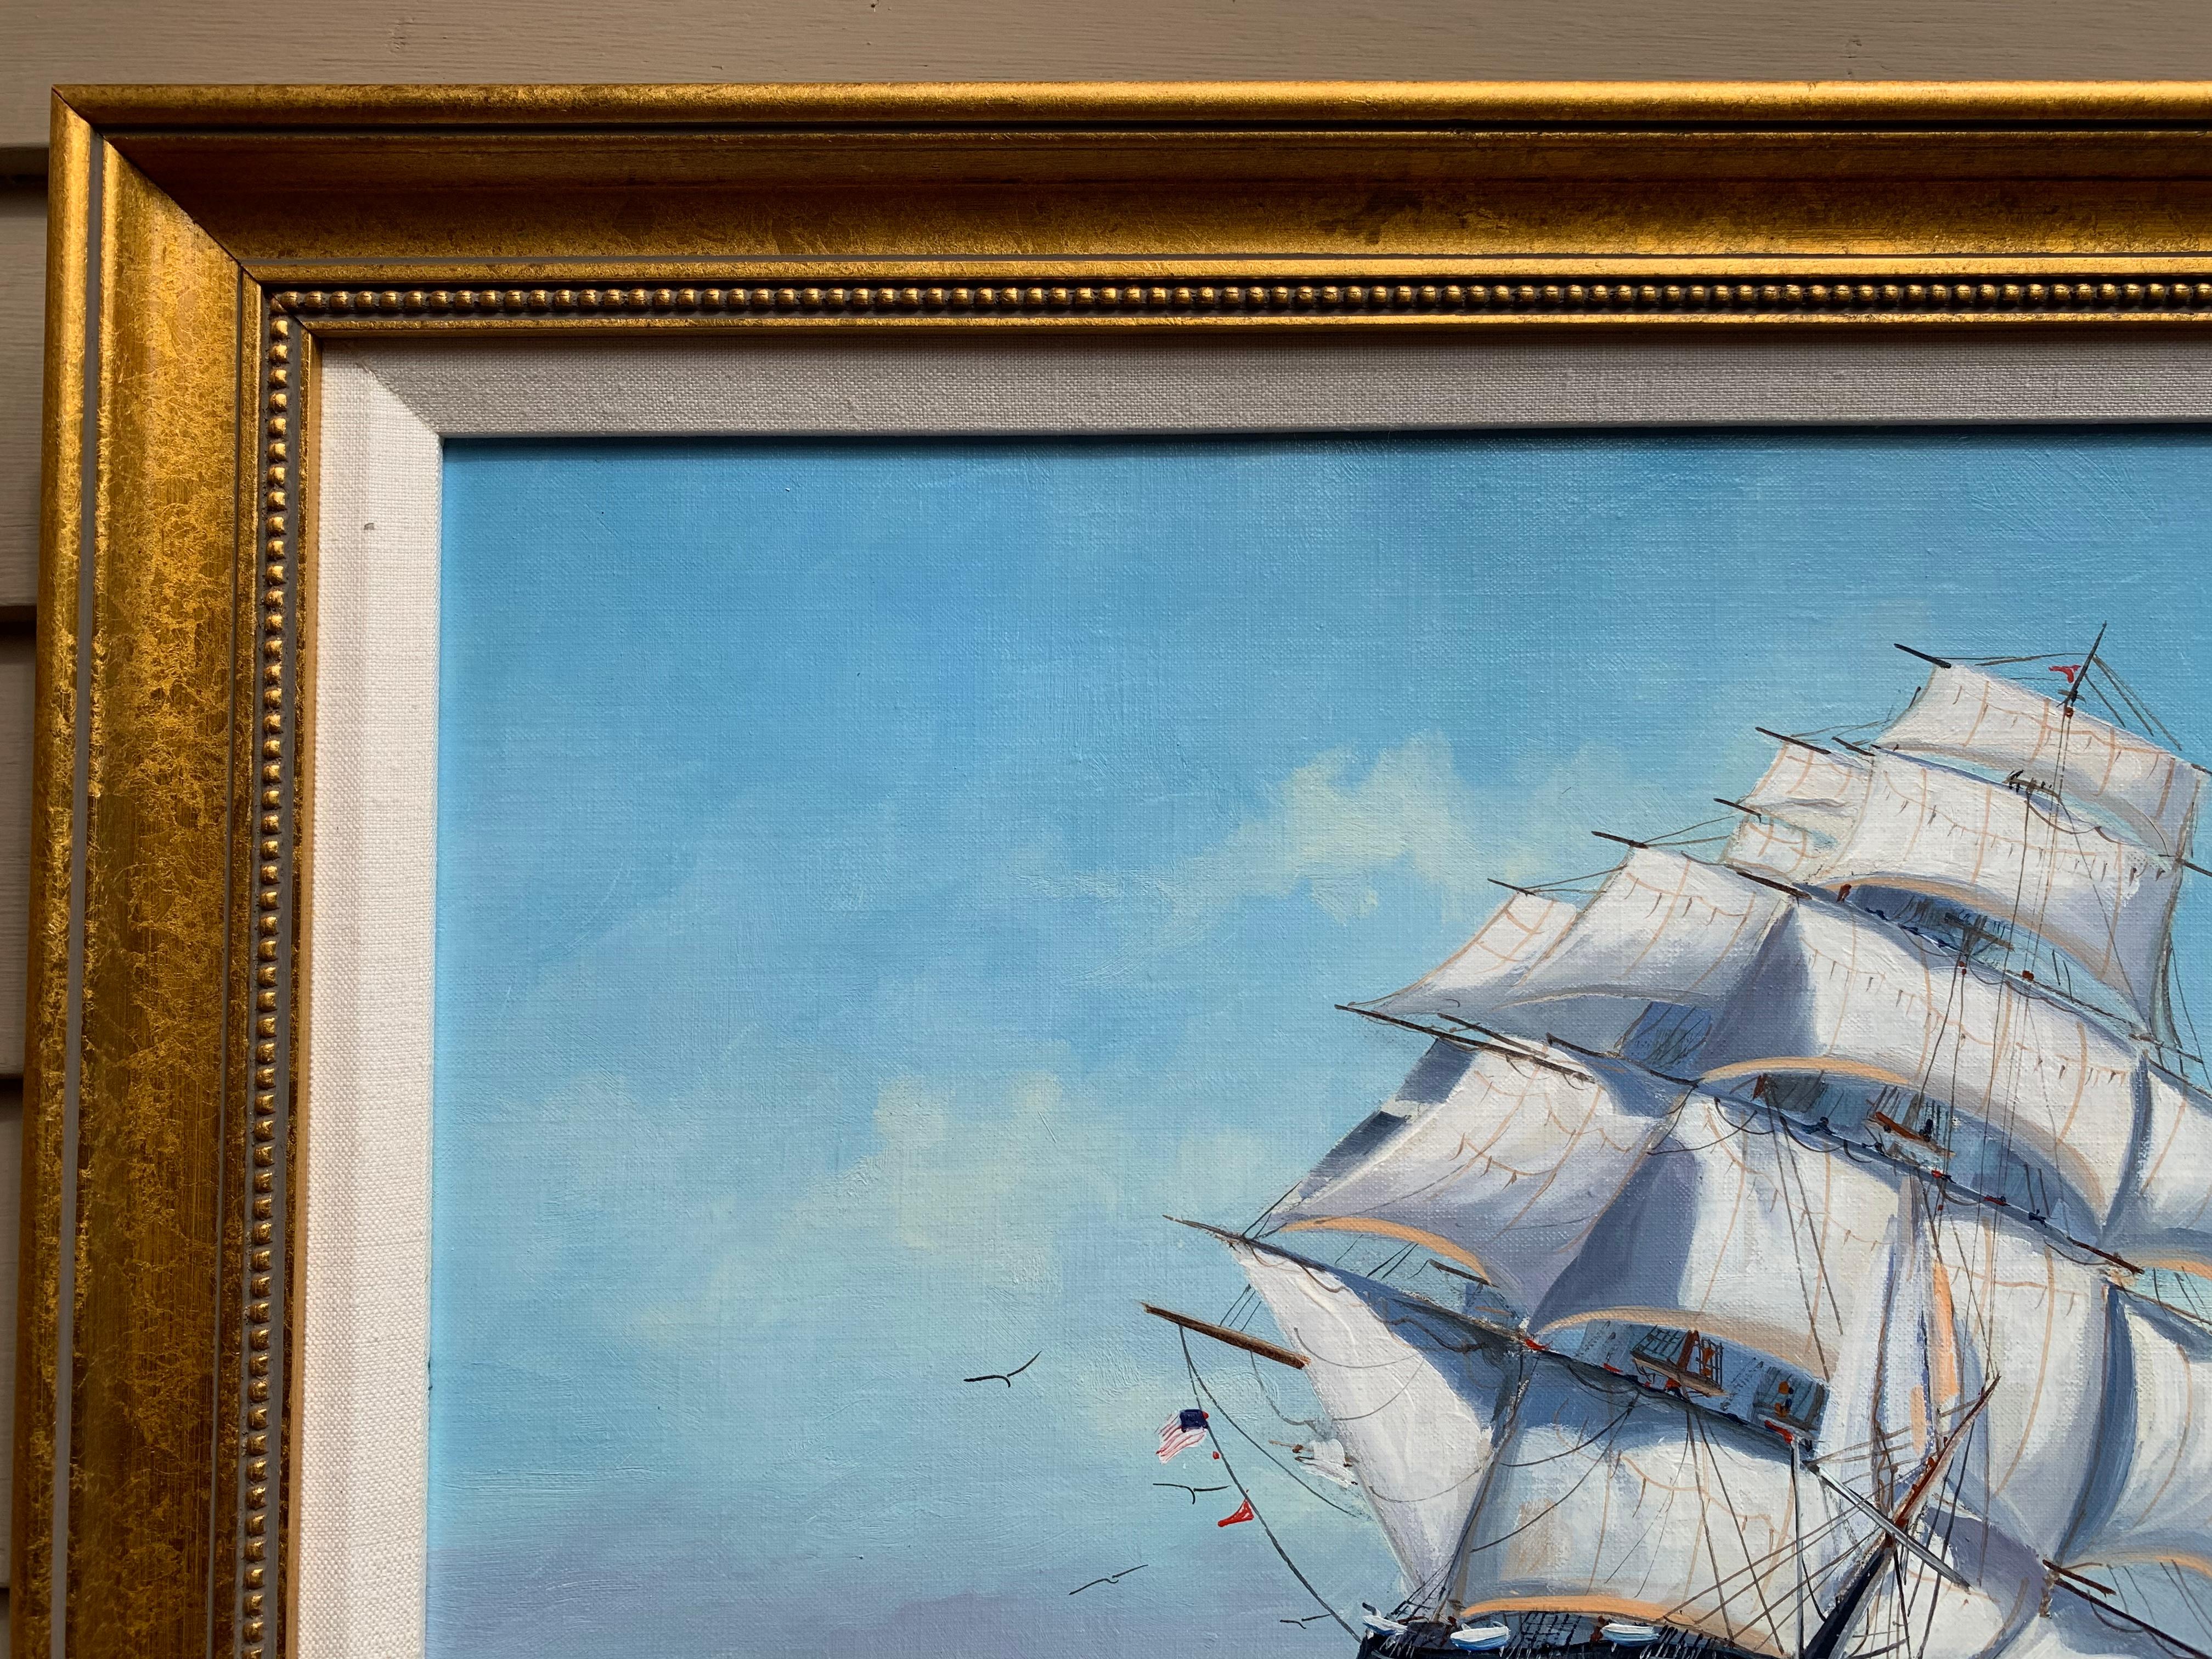 Up for sale is a beautiful original oil painting on canvas depicting sailing ships in the stormy ocean by Listed American Artist Malcolm Waite (XX century).
Malcolm Waite worked in Massachusetts (Cape Cod). He painted the ocean and beach scenes,